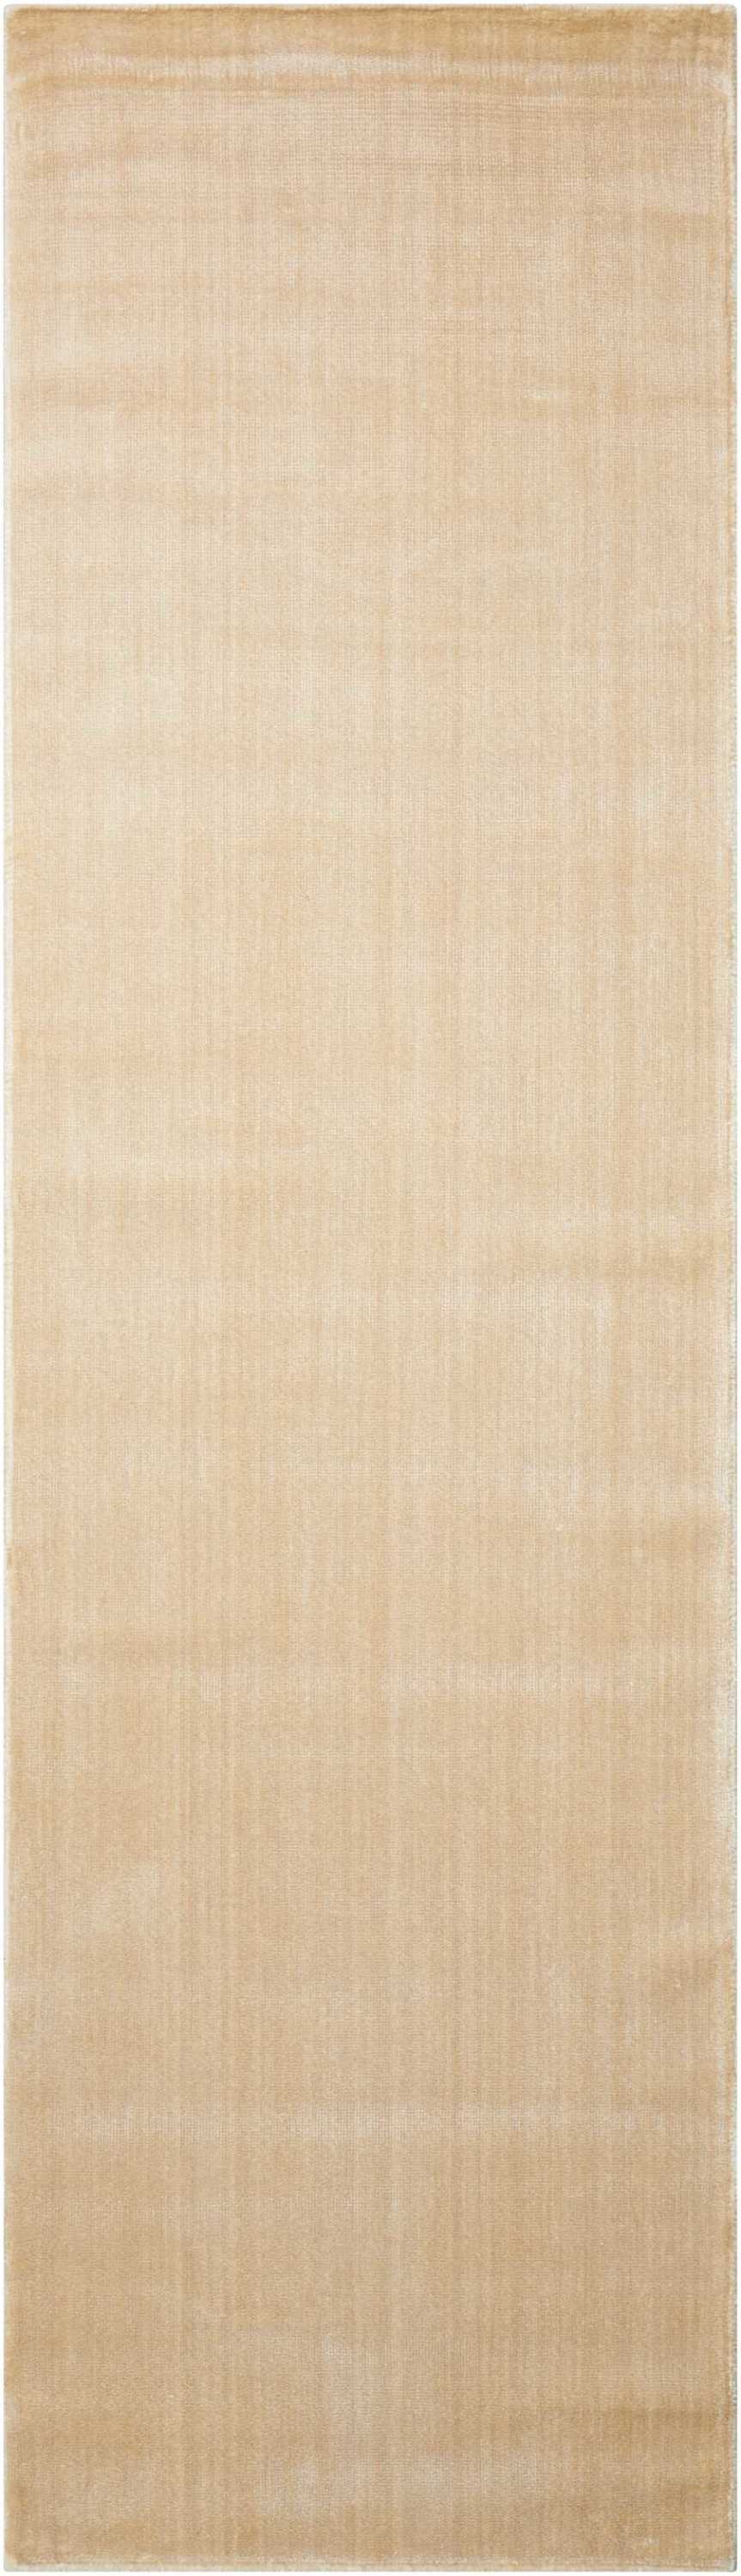 Nourison Home Starlight STA06 Oyster Contemporary Loom Rug